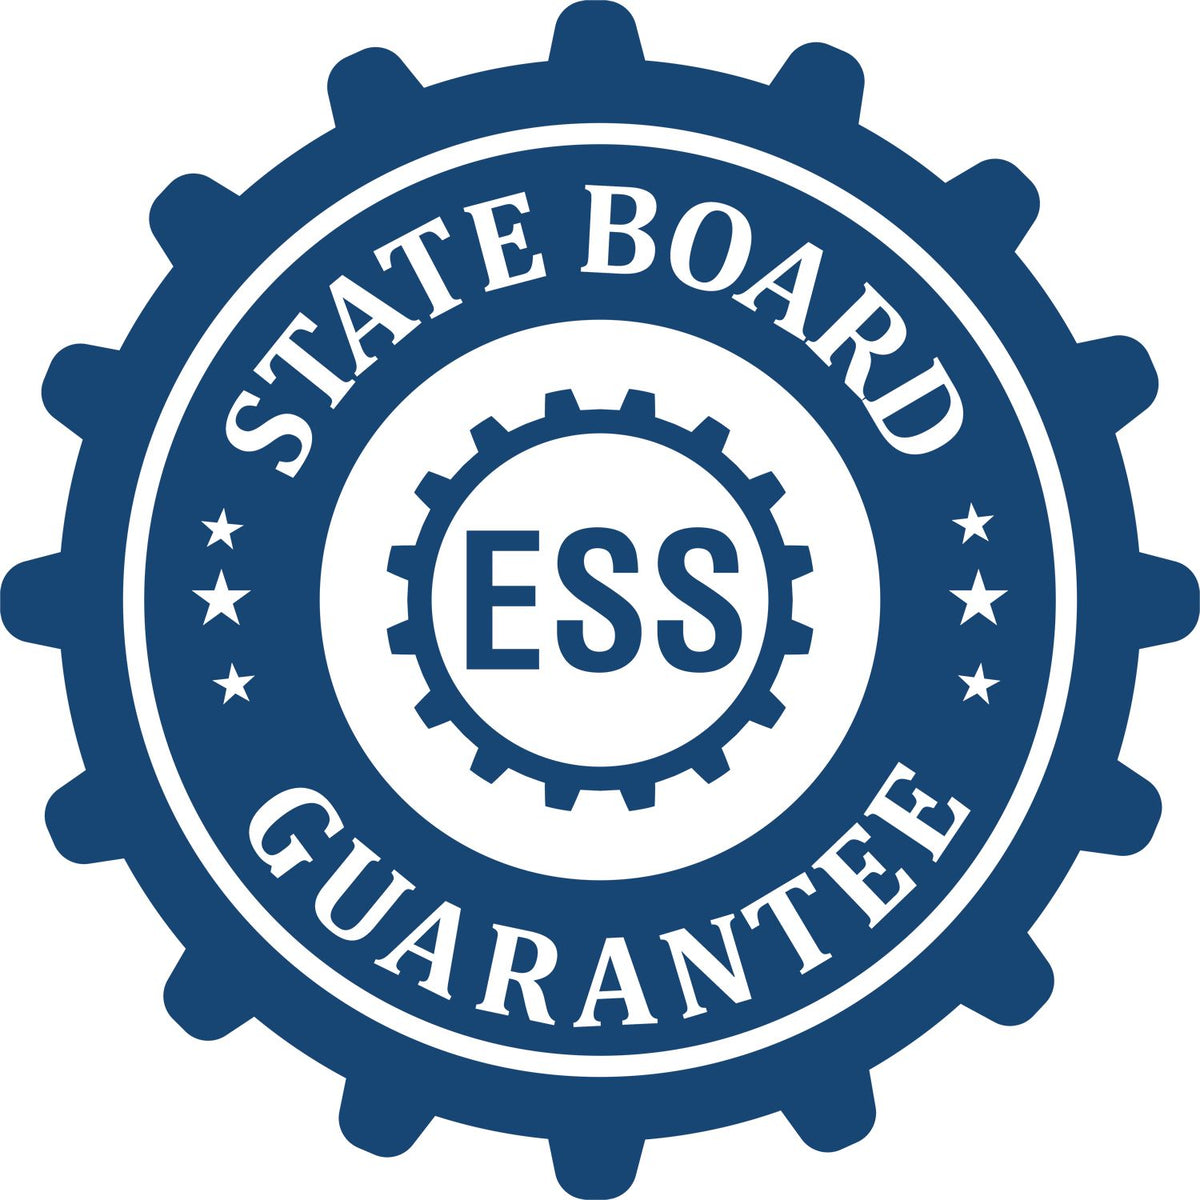 An emblem in a gear shape illustrating a state board guarantee for the Missouri Geologist Desk Seal